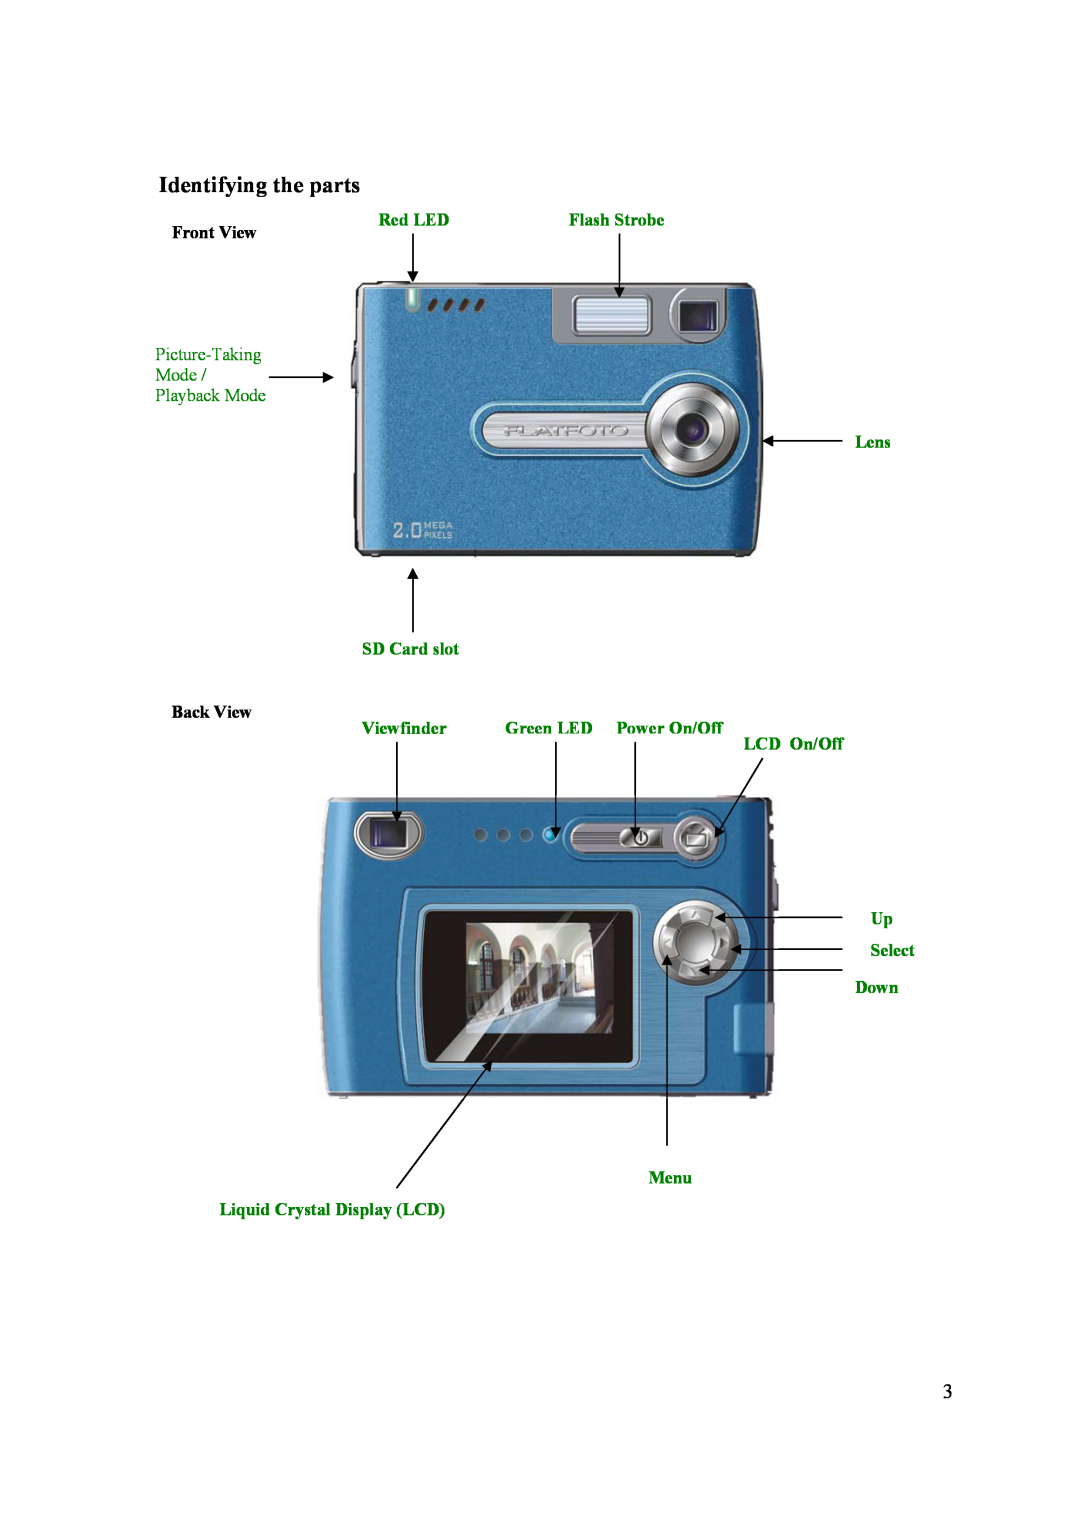 Samsung 2 Identifying the parts, Front View, Red LED, Flash Strobe, Picture-Taking Mode Playback Mode, Lens SD Card slot 